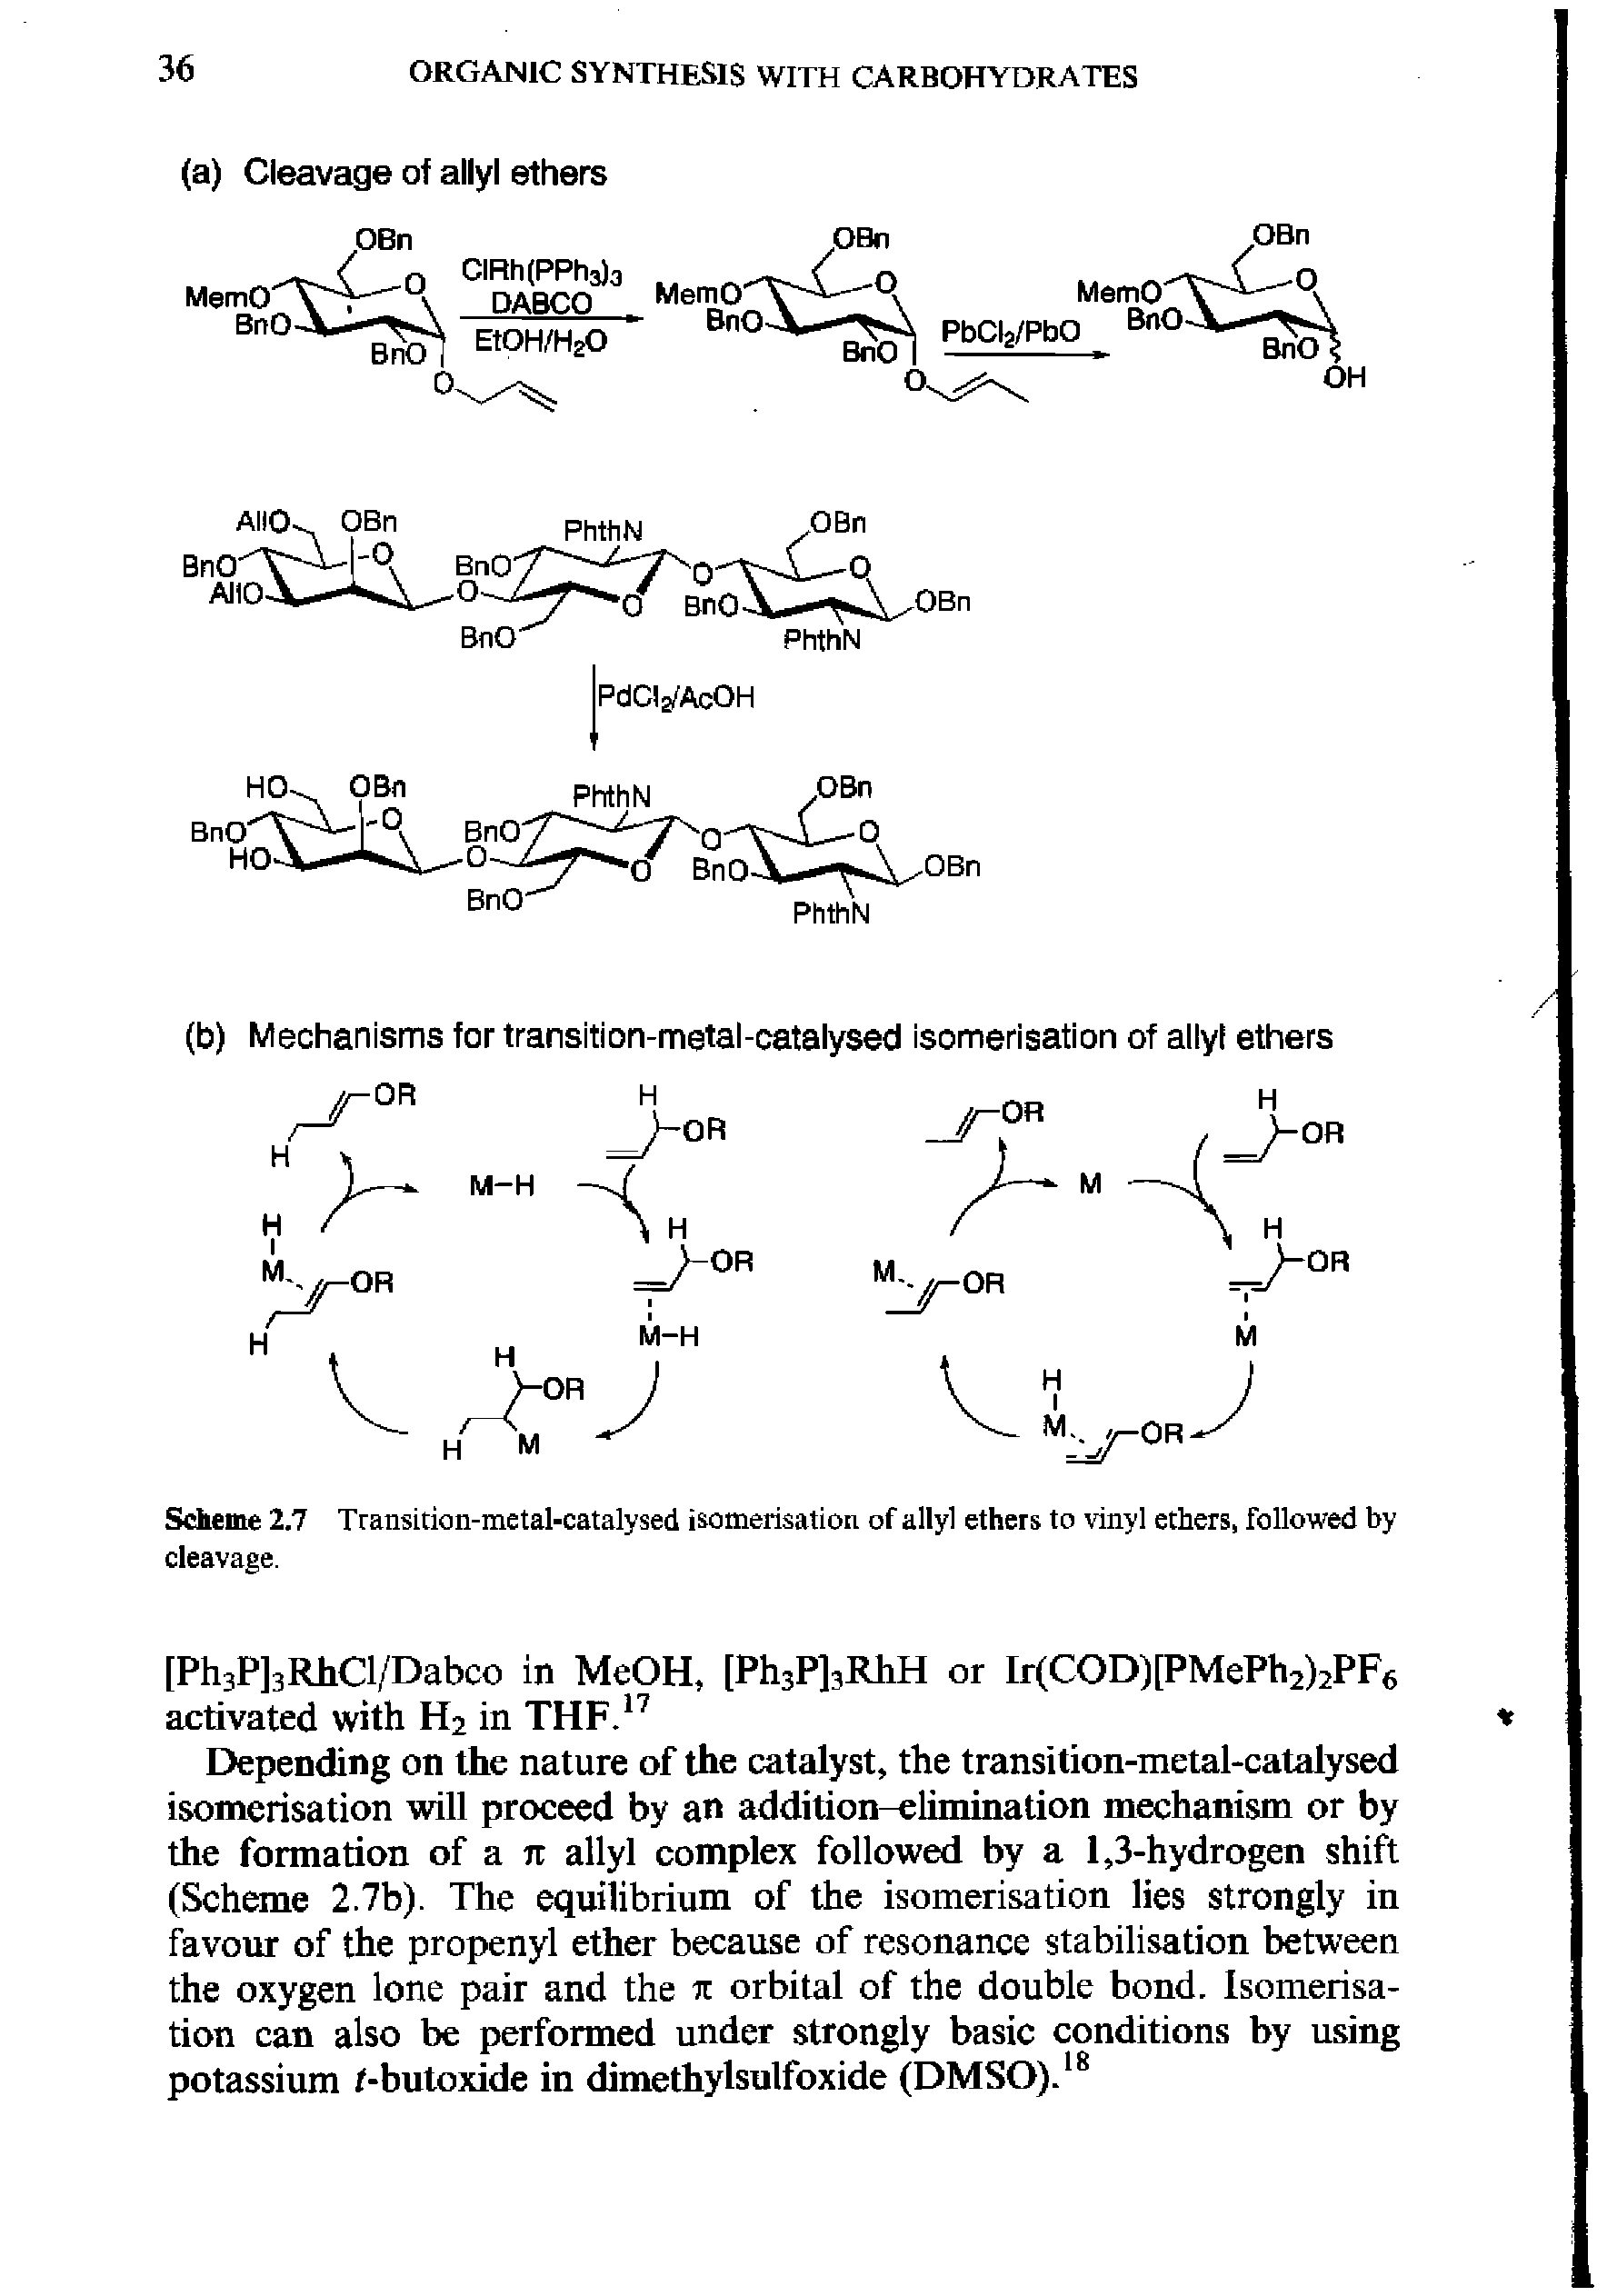 Scheme 2.7 Transition-metal-catalysed isomerisation of allyl ethers to vinyl ethers, followed by cleavage.